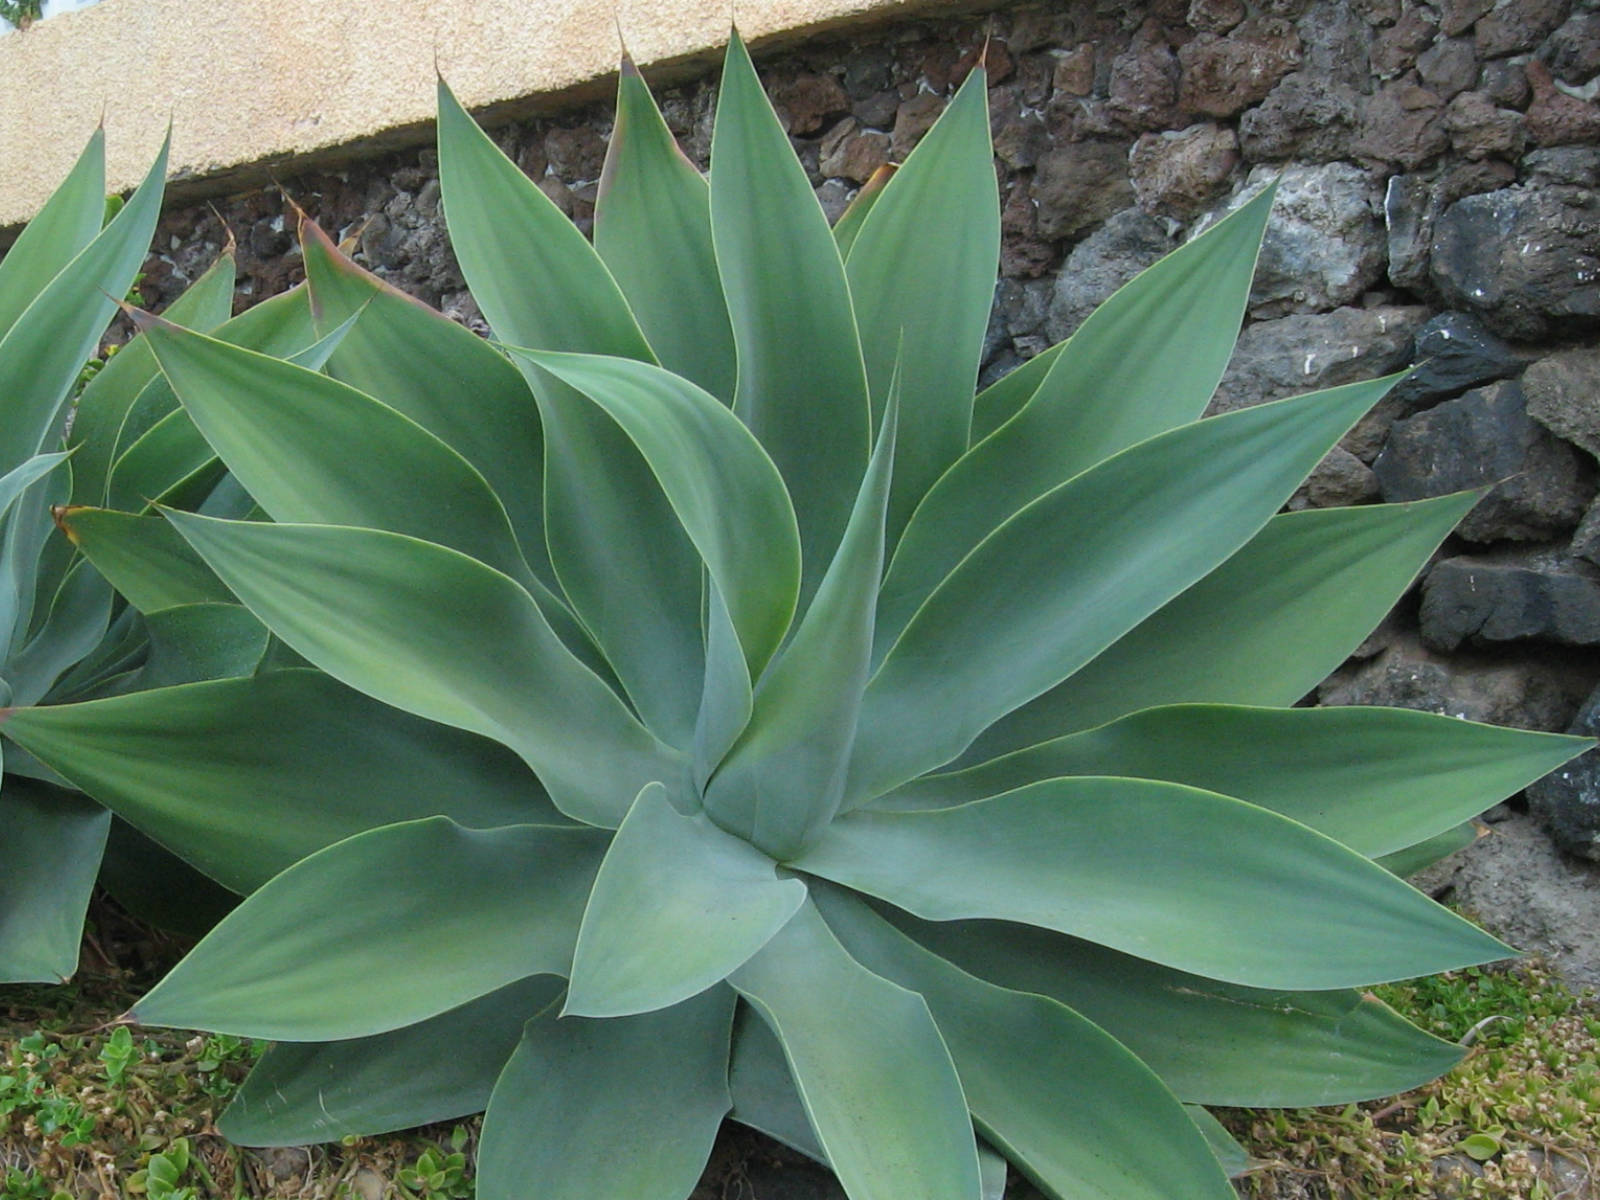 How to Grow and Care for Agave | Agave attenuata, Agaves and Plants